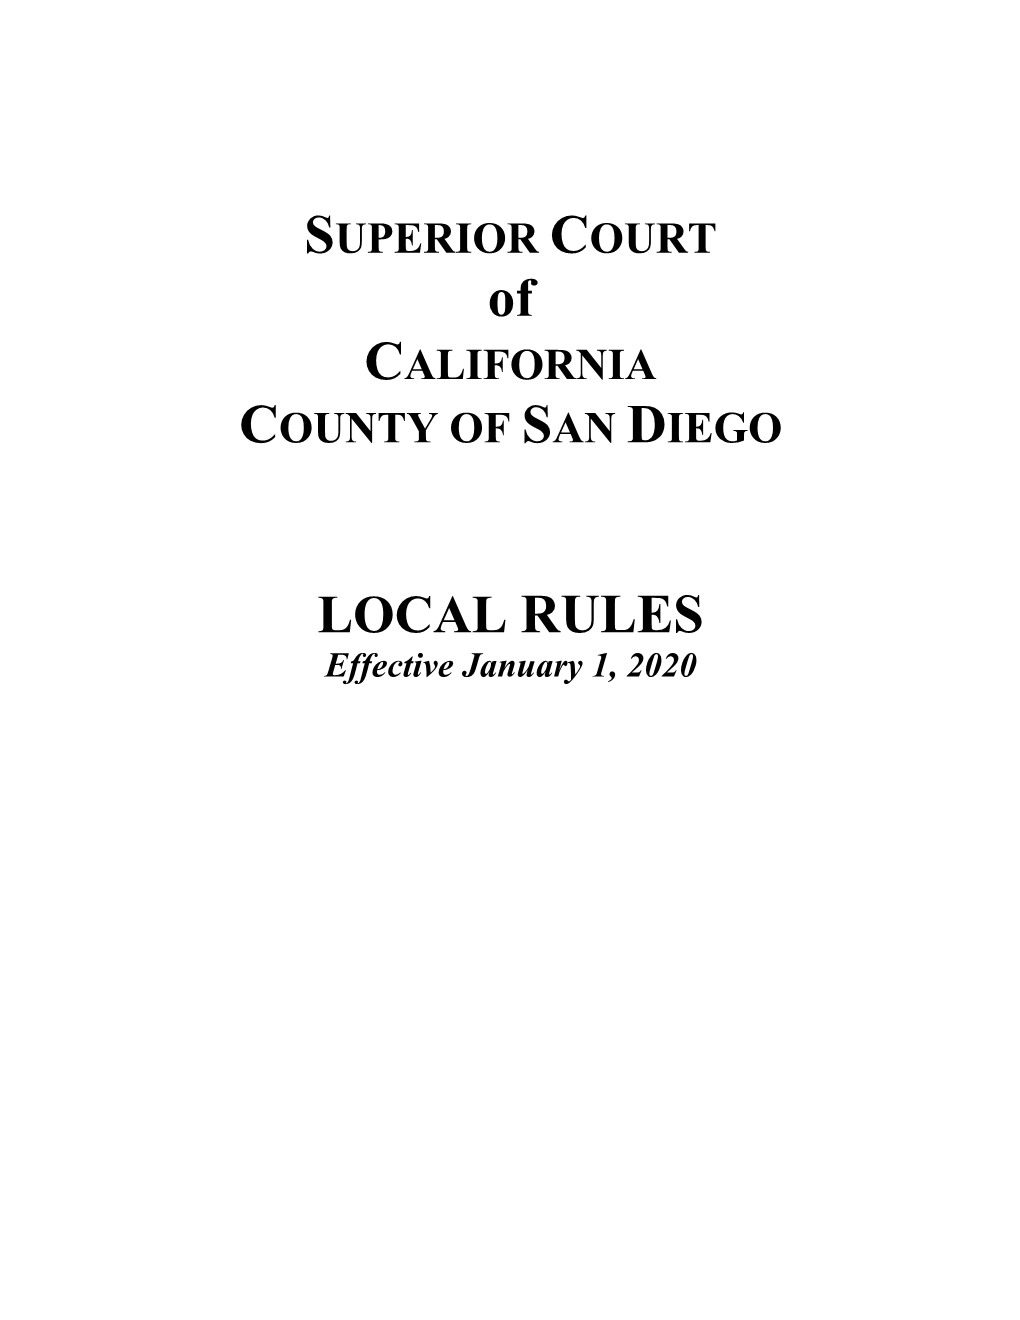 LOCAL RULES Effective January 1, 2020